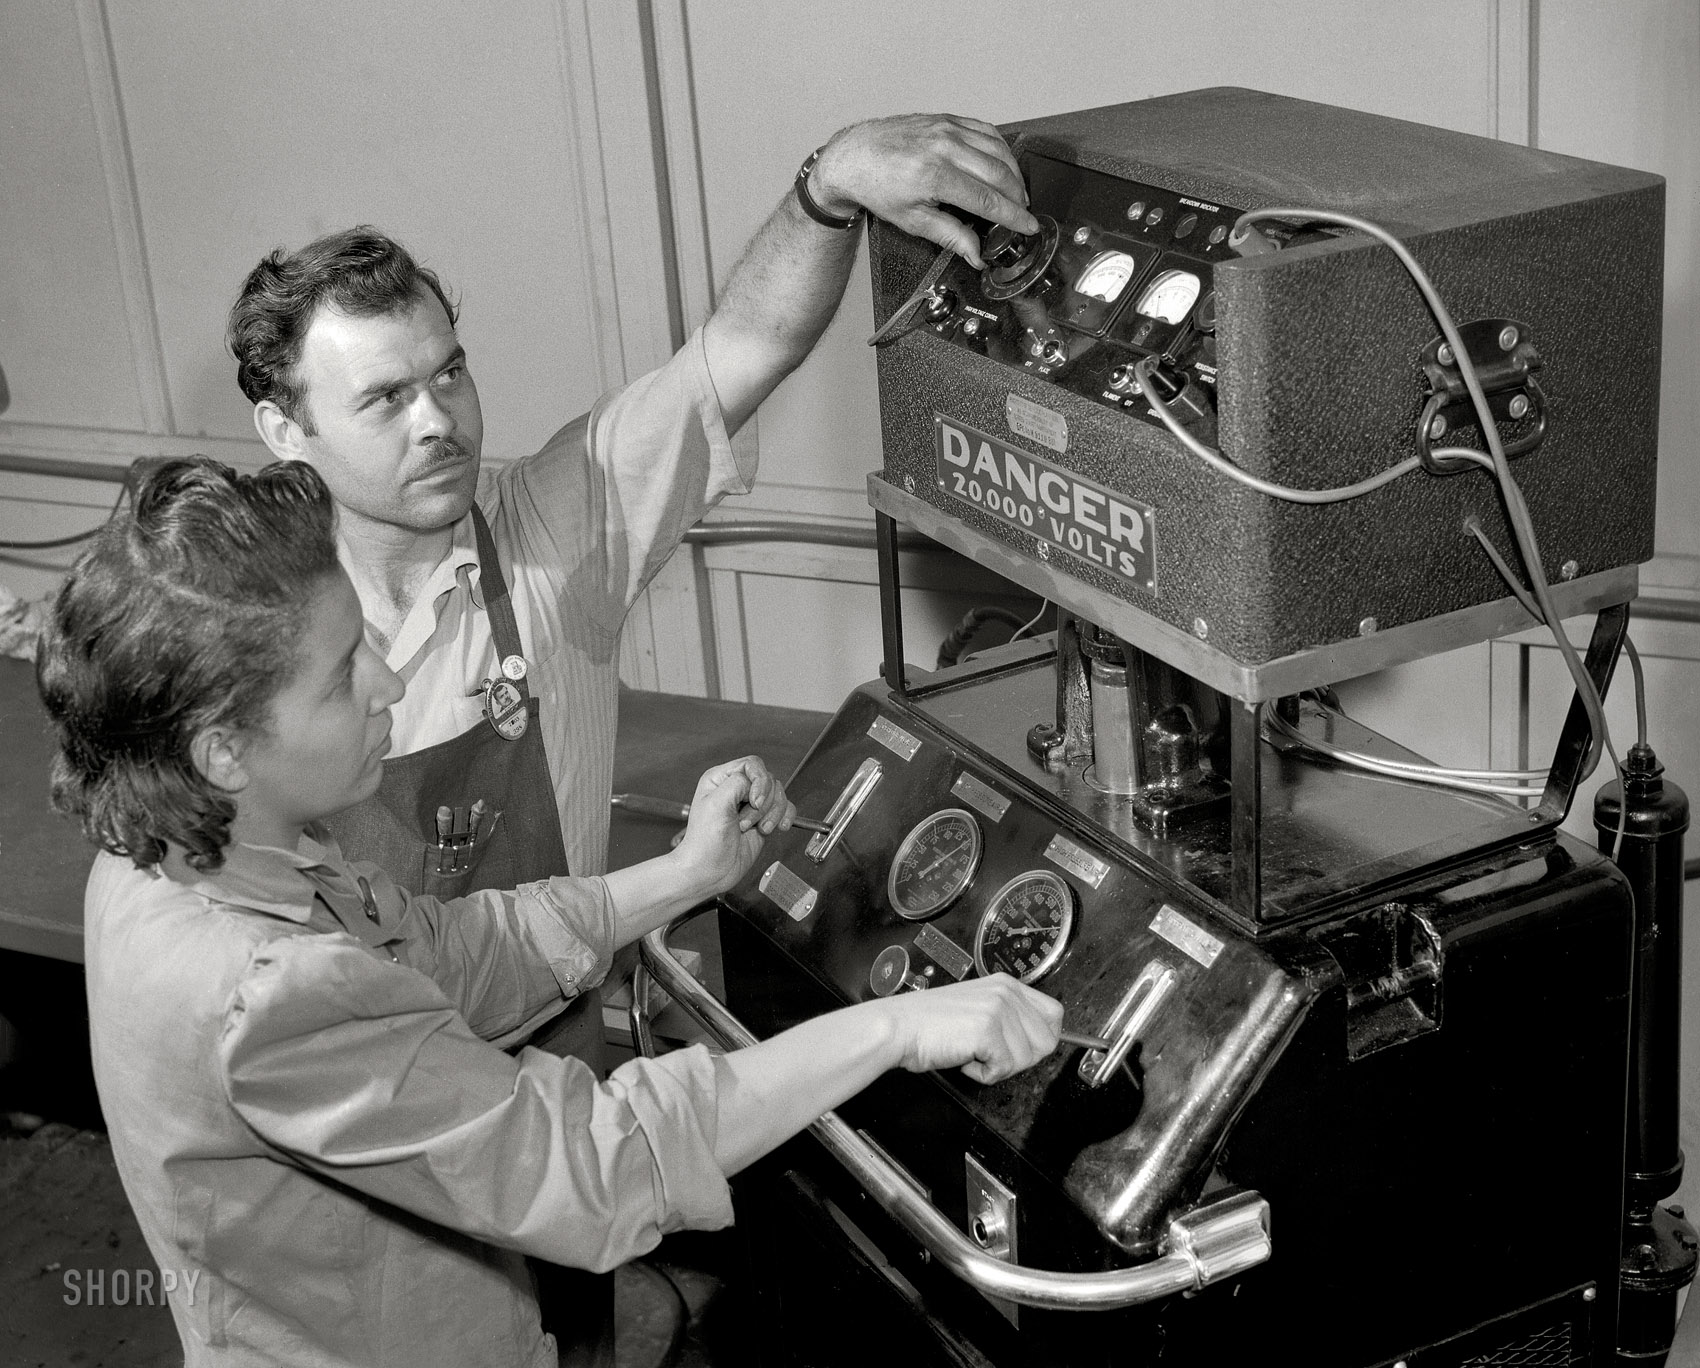 July 1942. Melrose Park, Illinois. "Production of aircraft engines. Buick plant. Foreman F.I. Bowman shows Marietta Morgan how to operate this bomb-test machine used to test reconditioned spark plugs. A young Negro girl, Marietta had been a clerk in a meat market. Her lack of industrial experience, however, has been no handicap for her present war job in a large Midwest airplane plant. She's rapidly becoming a skilled and efficient machine operator." Medium format safety negative by Ann Rosener for the Office of War Information. View full size.